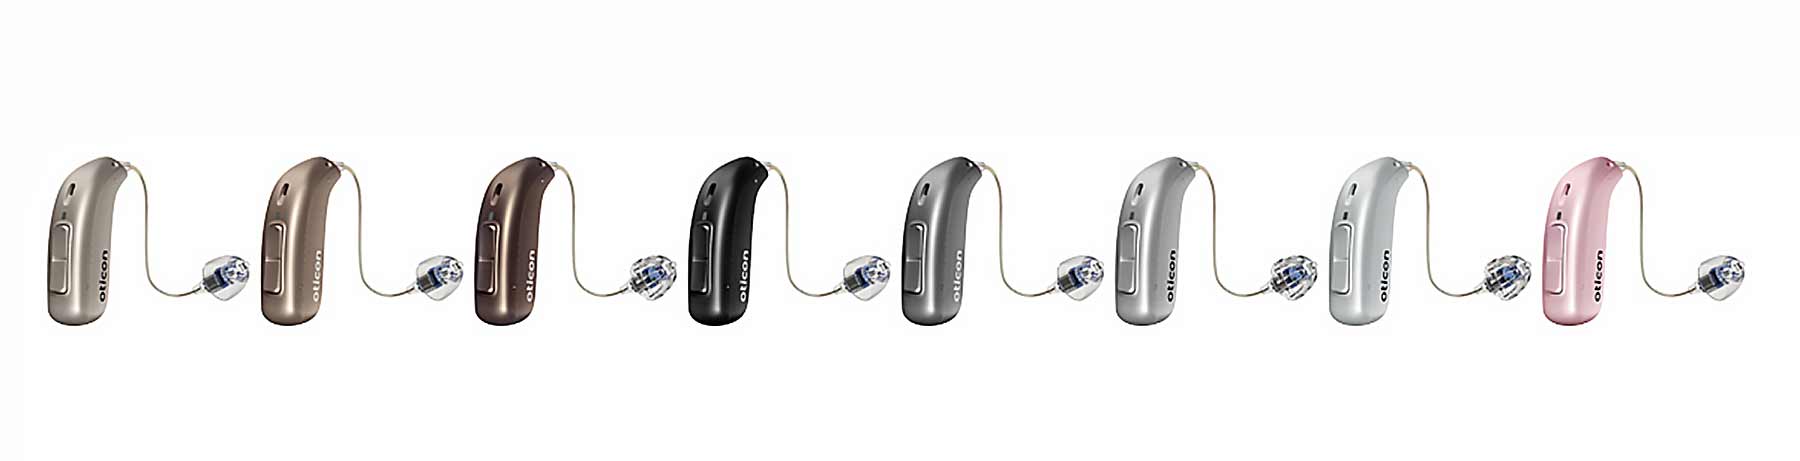 The complete range of Oticon Hearing Aids available at Pinnacle Hearing Care in Ireland